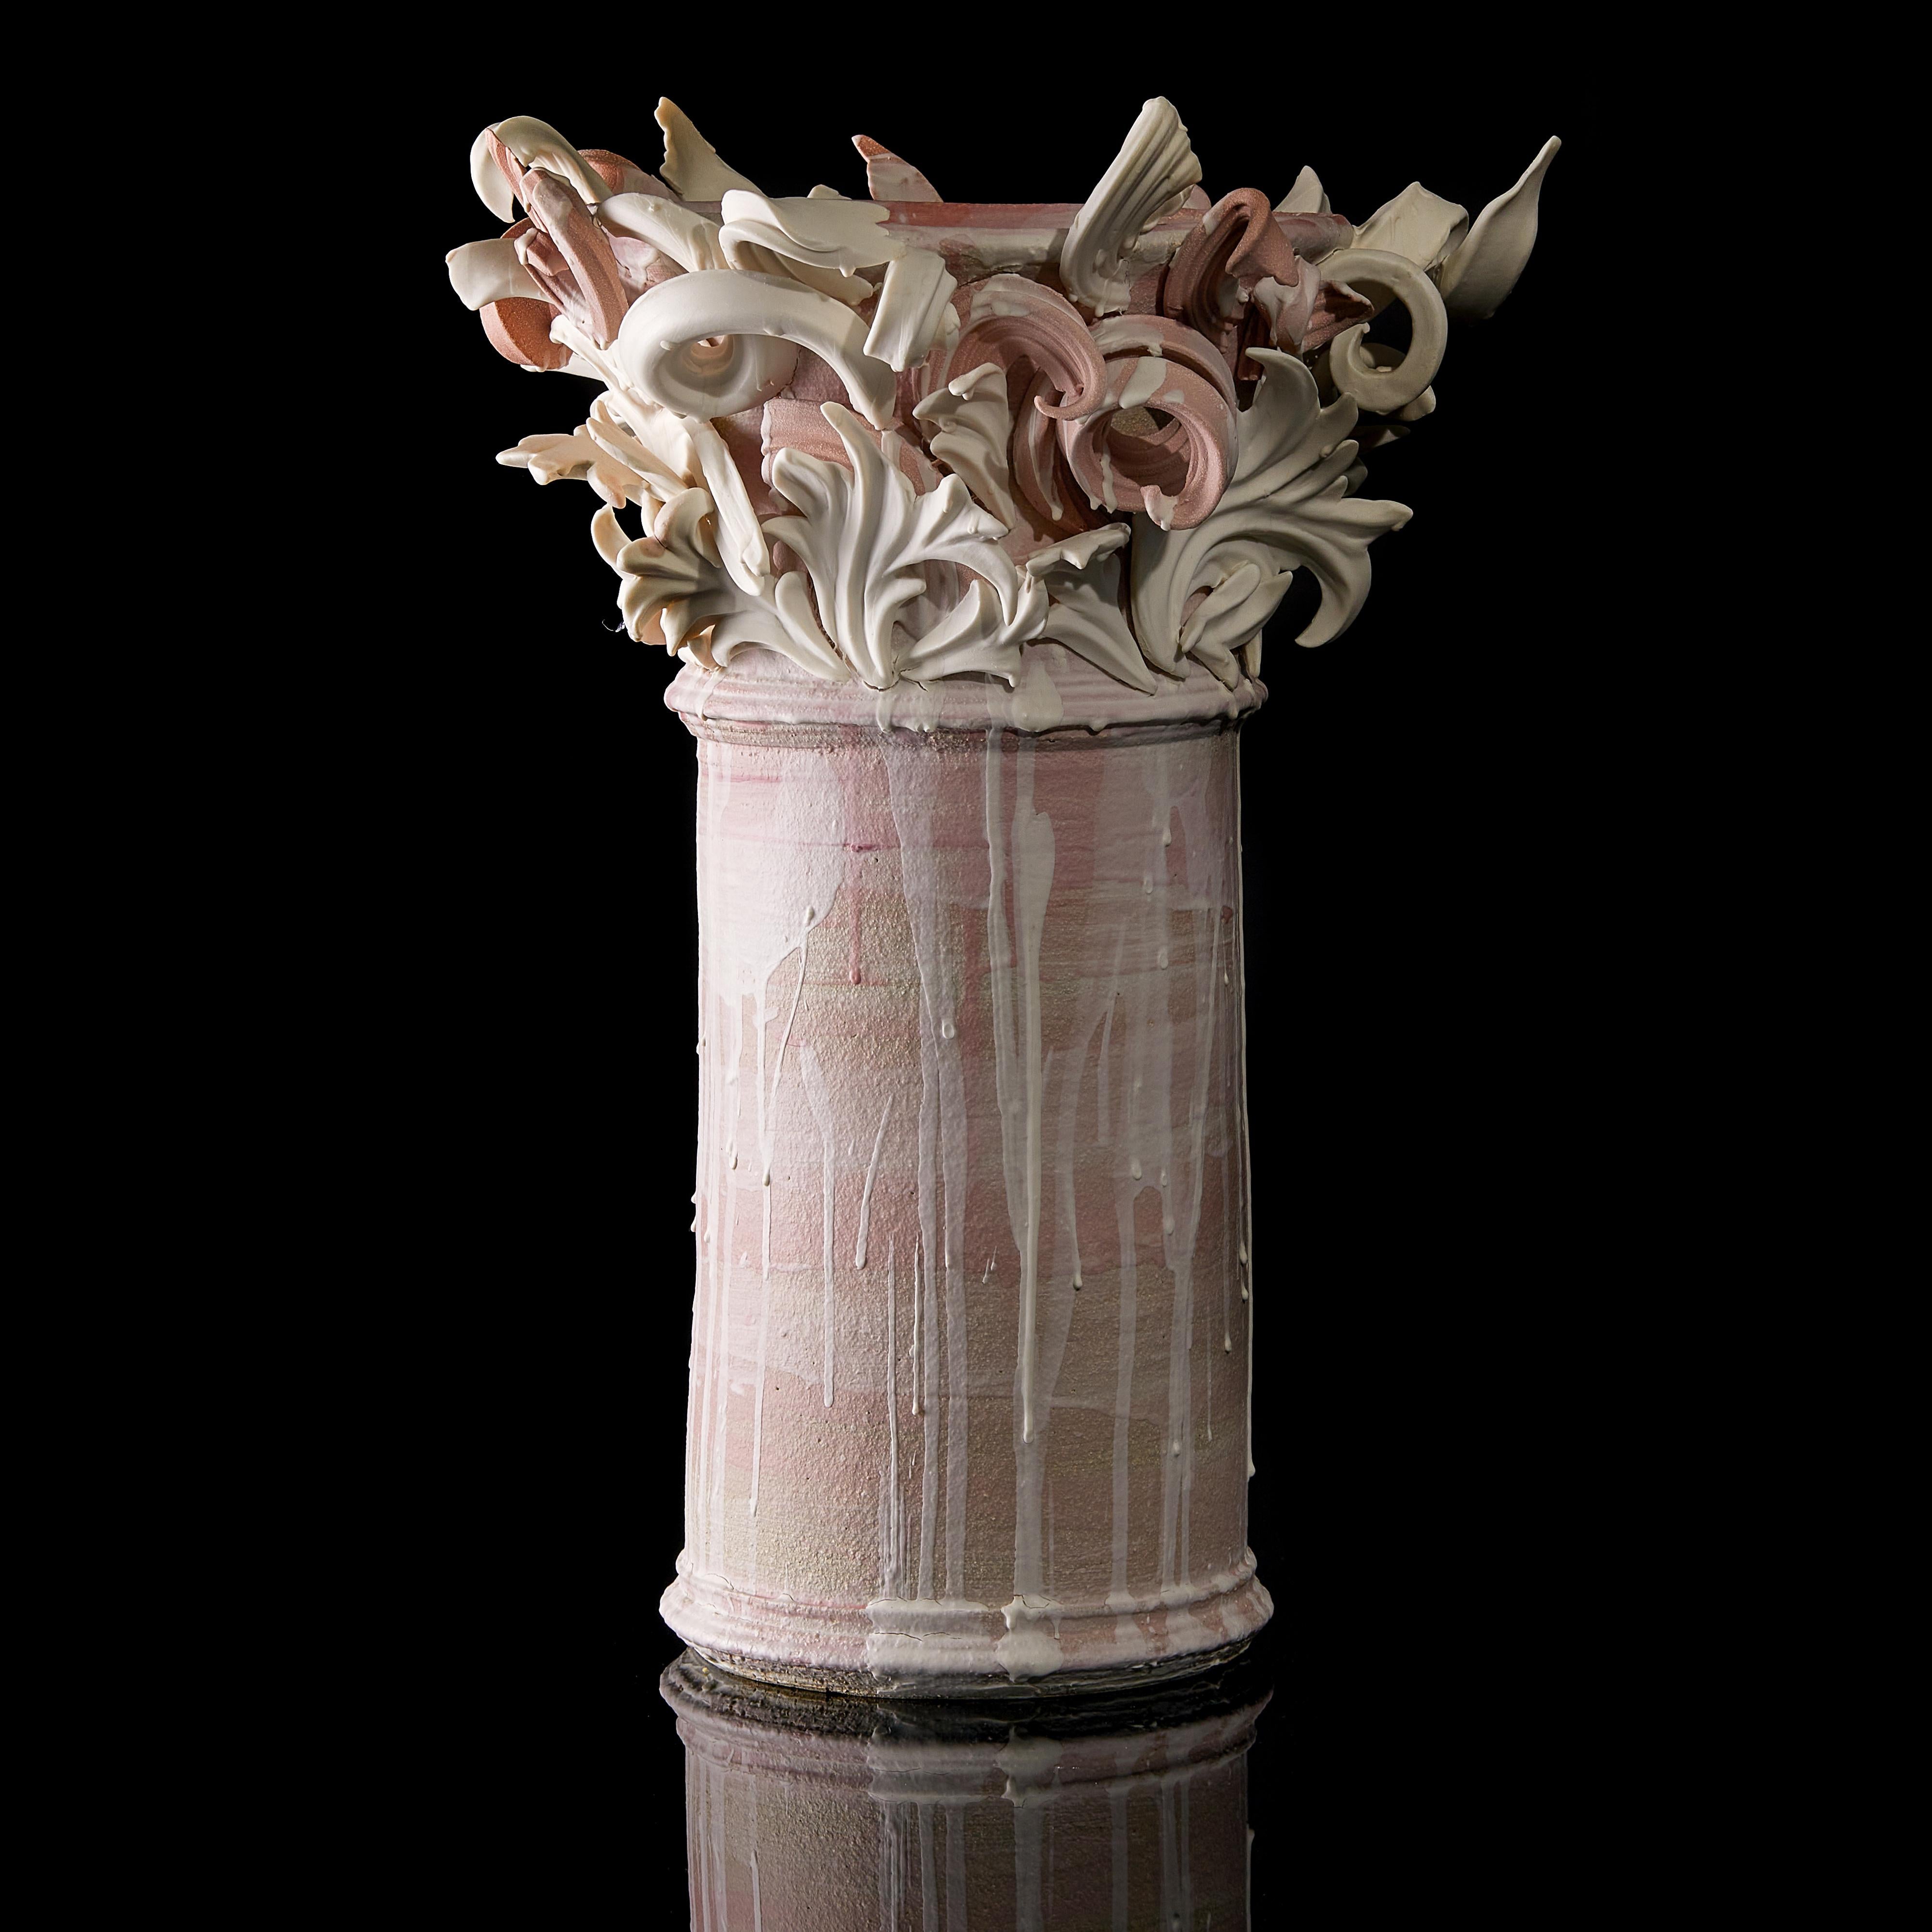 Contemporary Colonnade II, a Unique Ceramic Sculptural Vase in Pink & White by Jo Taylor